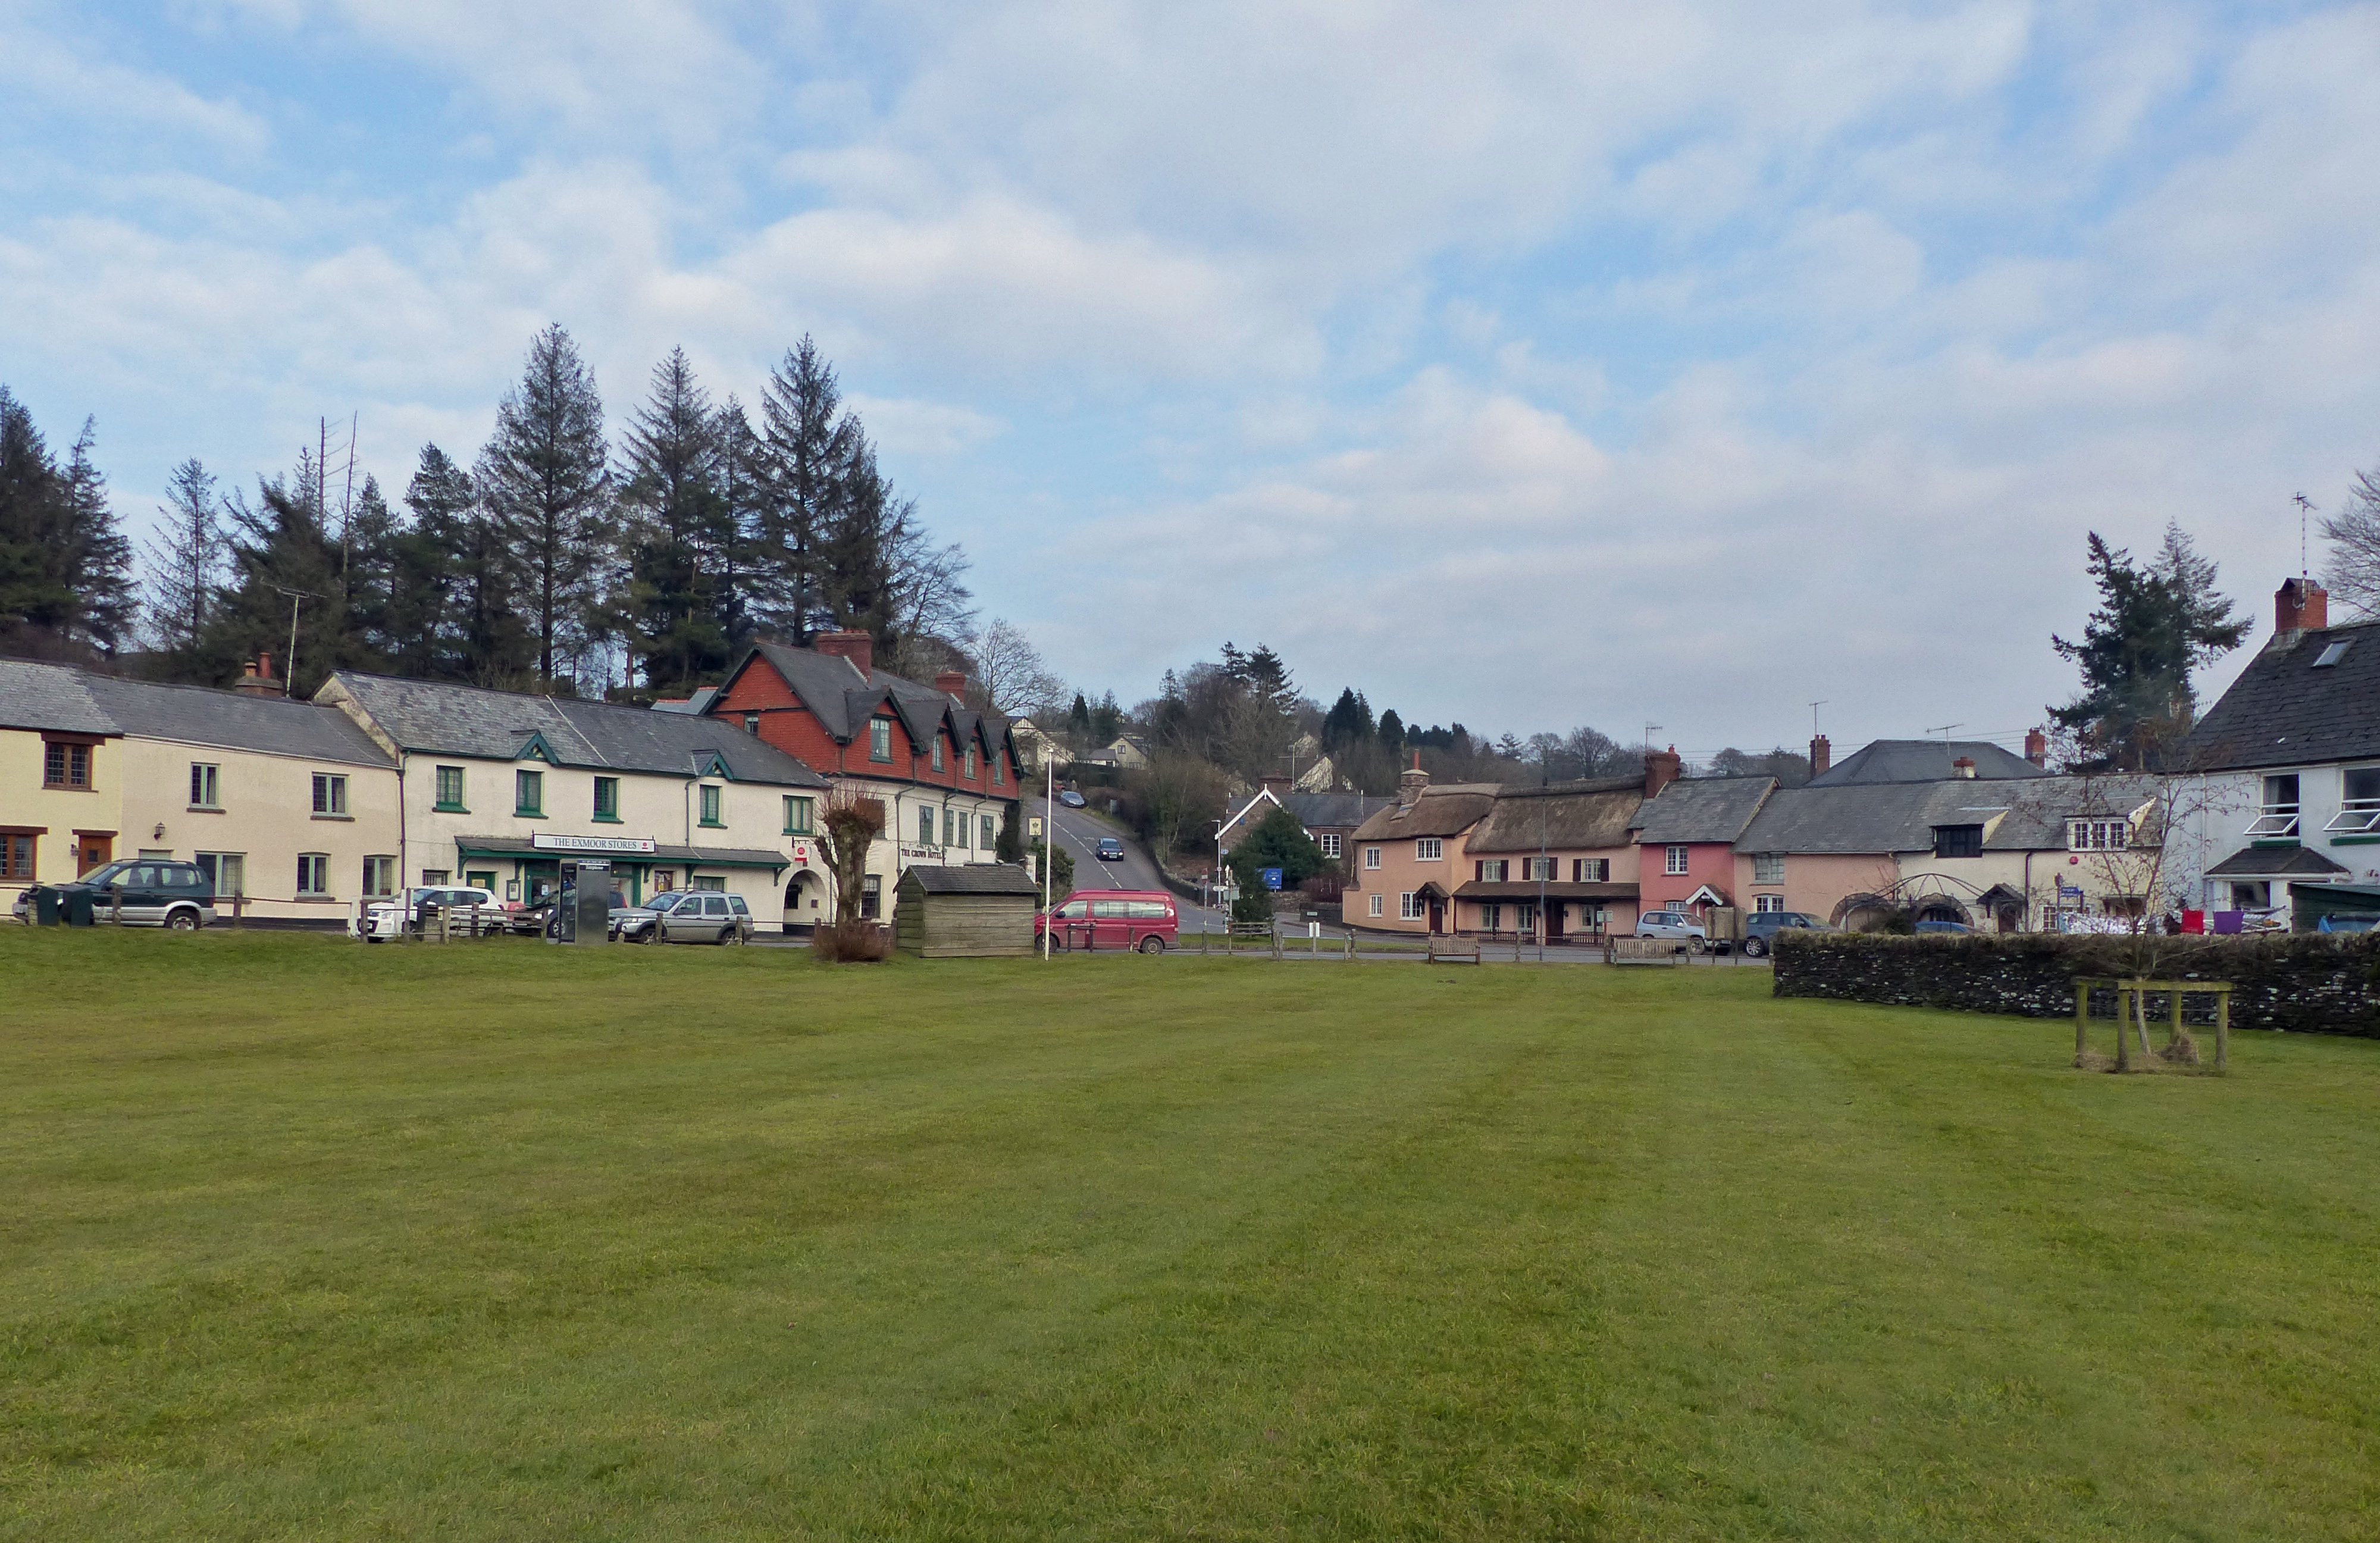 Exford Village and Green